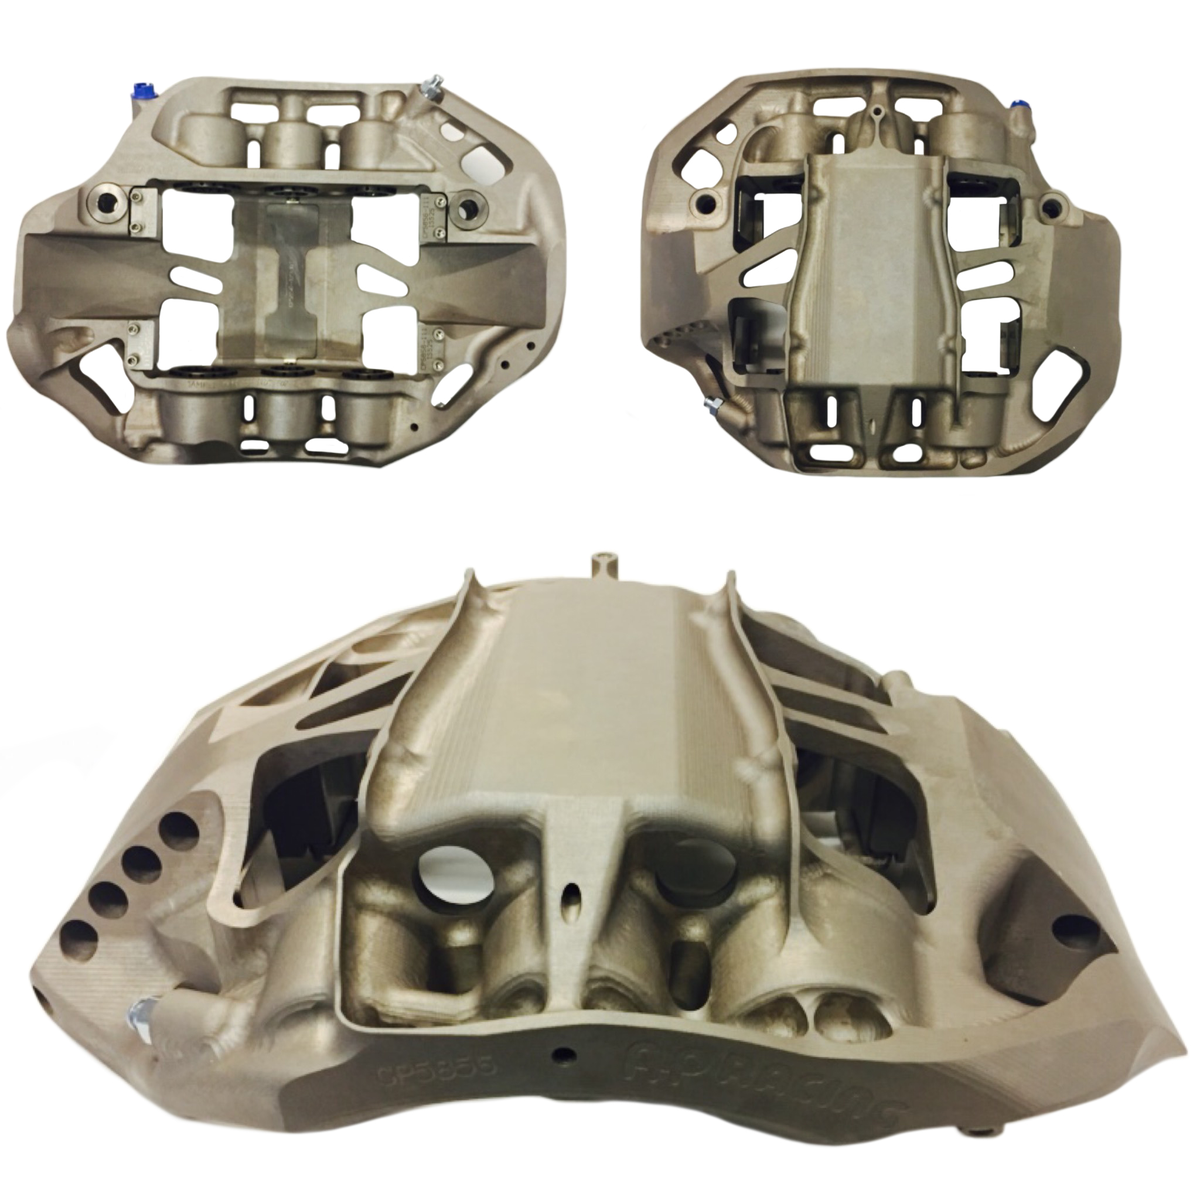 The biggest type of brake caliper is the Short Track type which is also used for Road Course races. These are built bigger and stronger in order to be able to handle the heat of the short track braking which can often get up to